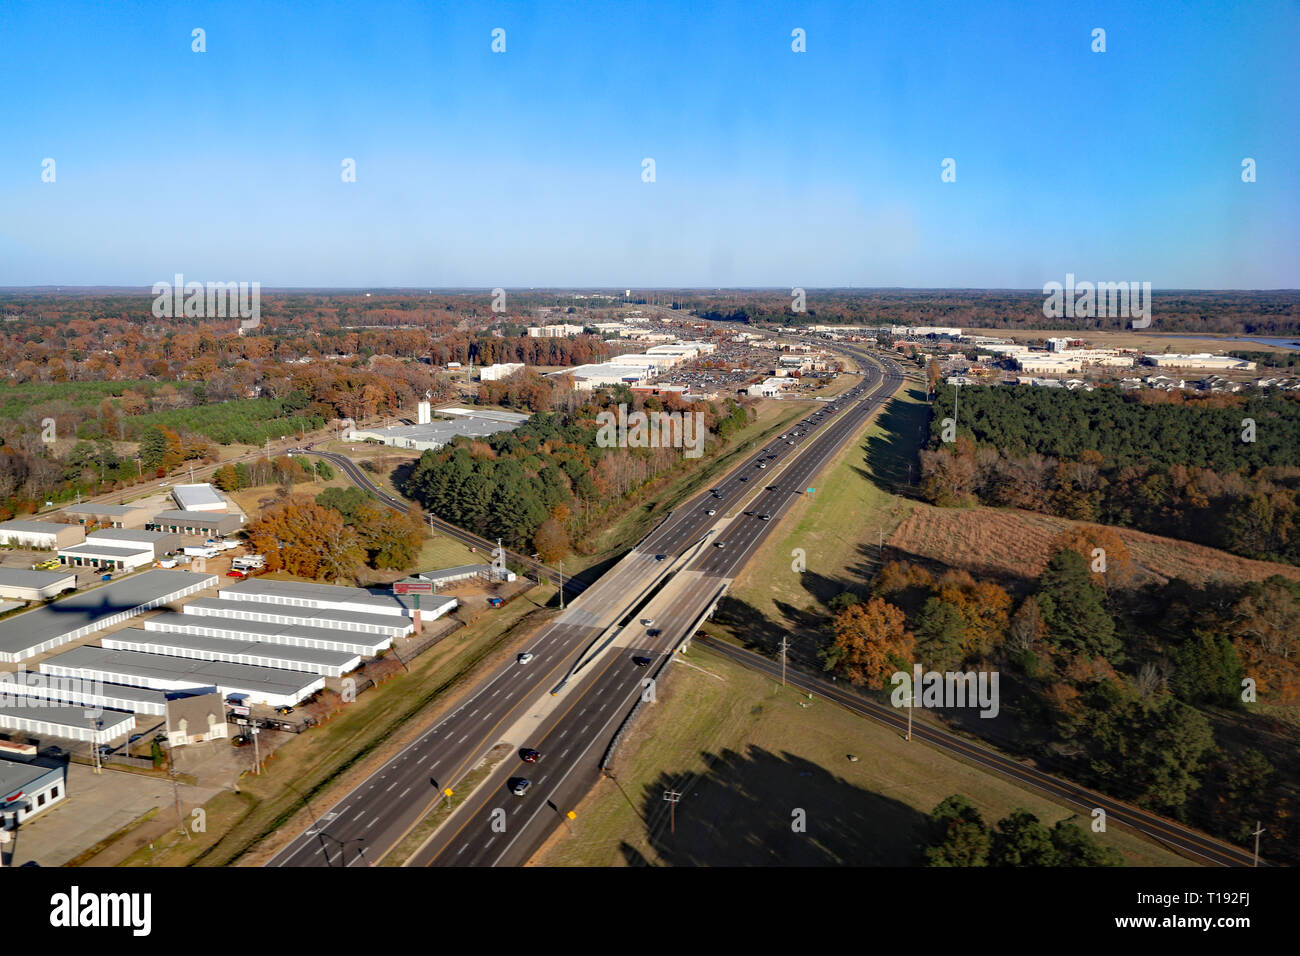 Flowoood, MS - USA / Dicembre 2, 2018: Lakeland Drive e Autostrada 25 in Flowood, MS Foto Stock